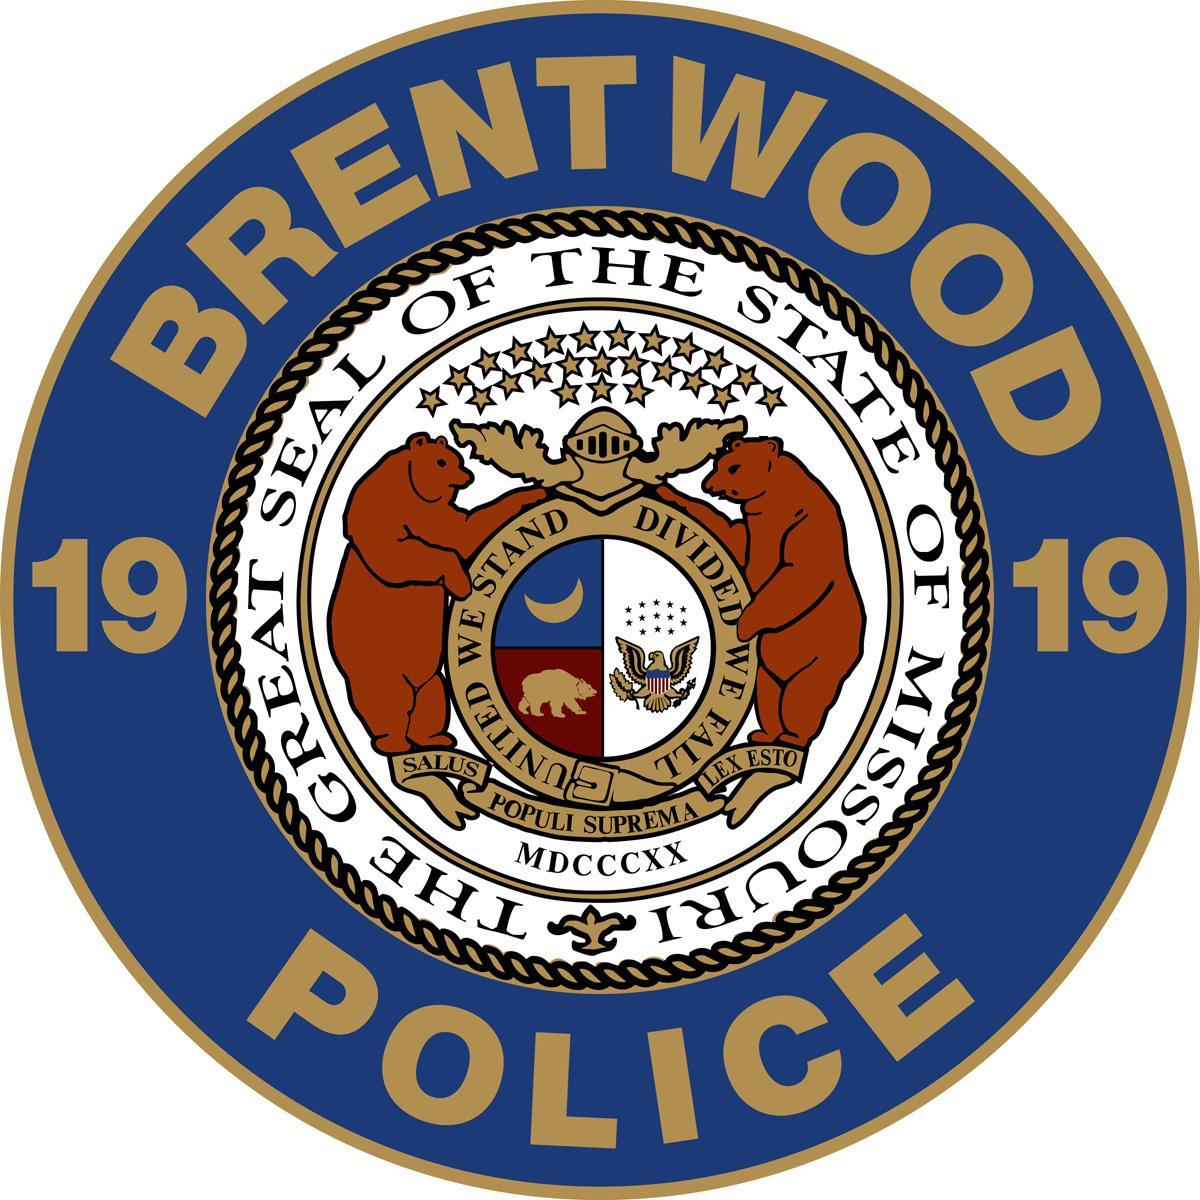 Serving the citizens of Brentwood, Missouri. Account is not monitored 24/7. In emergency, call 911.